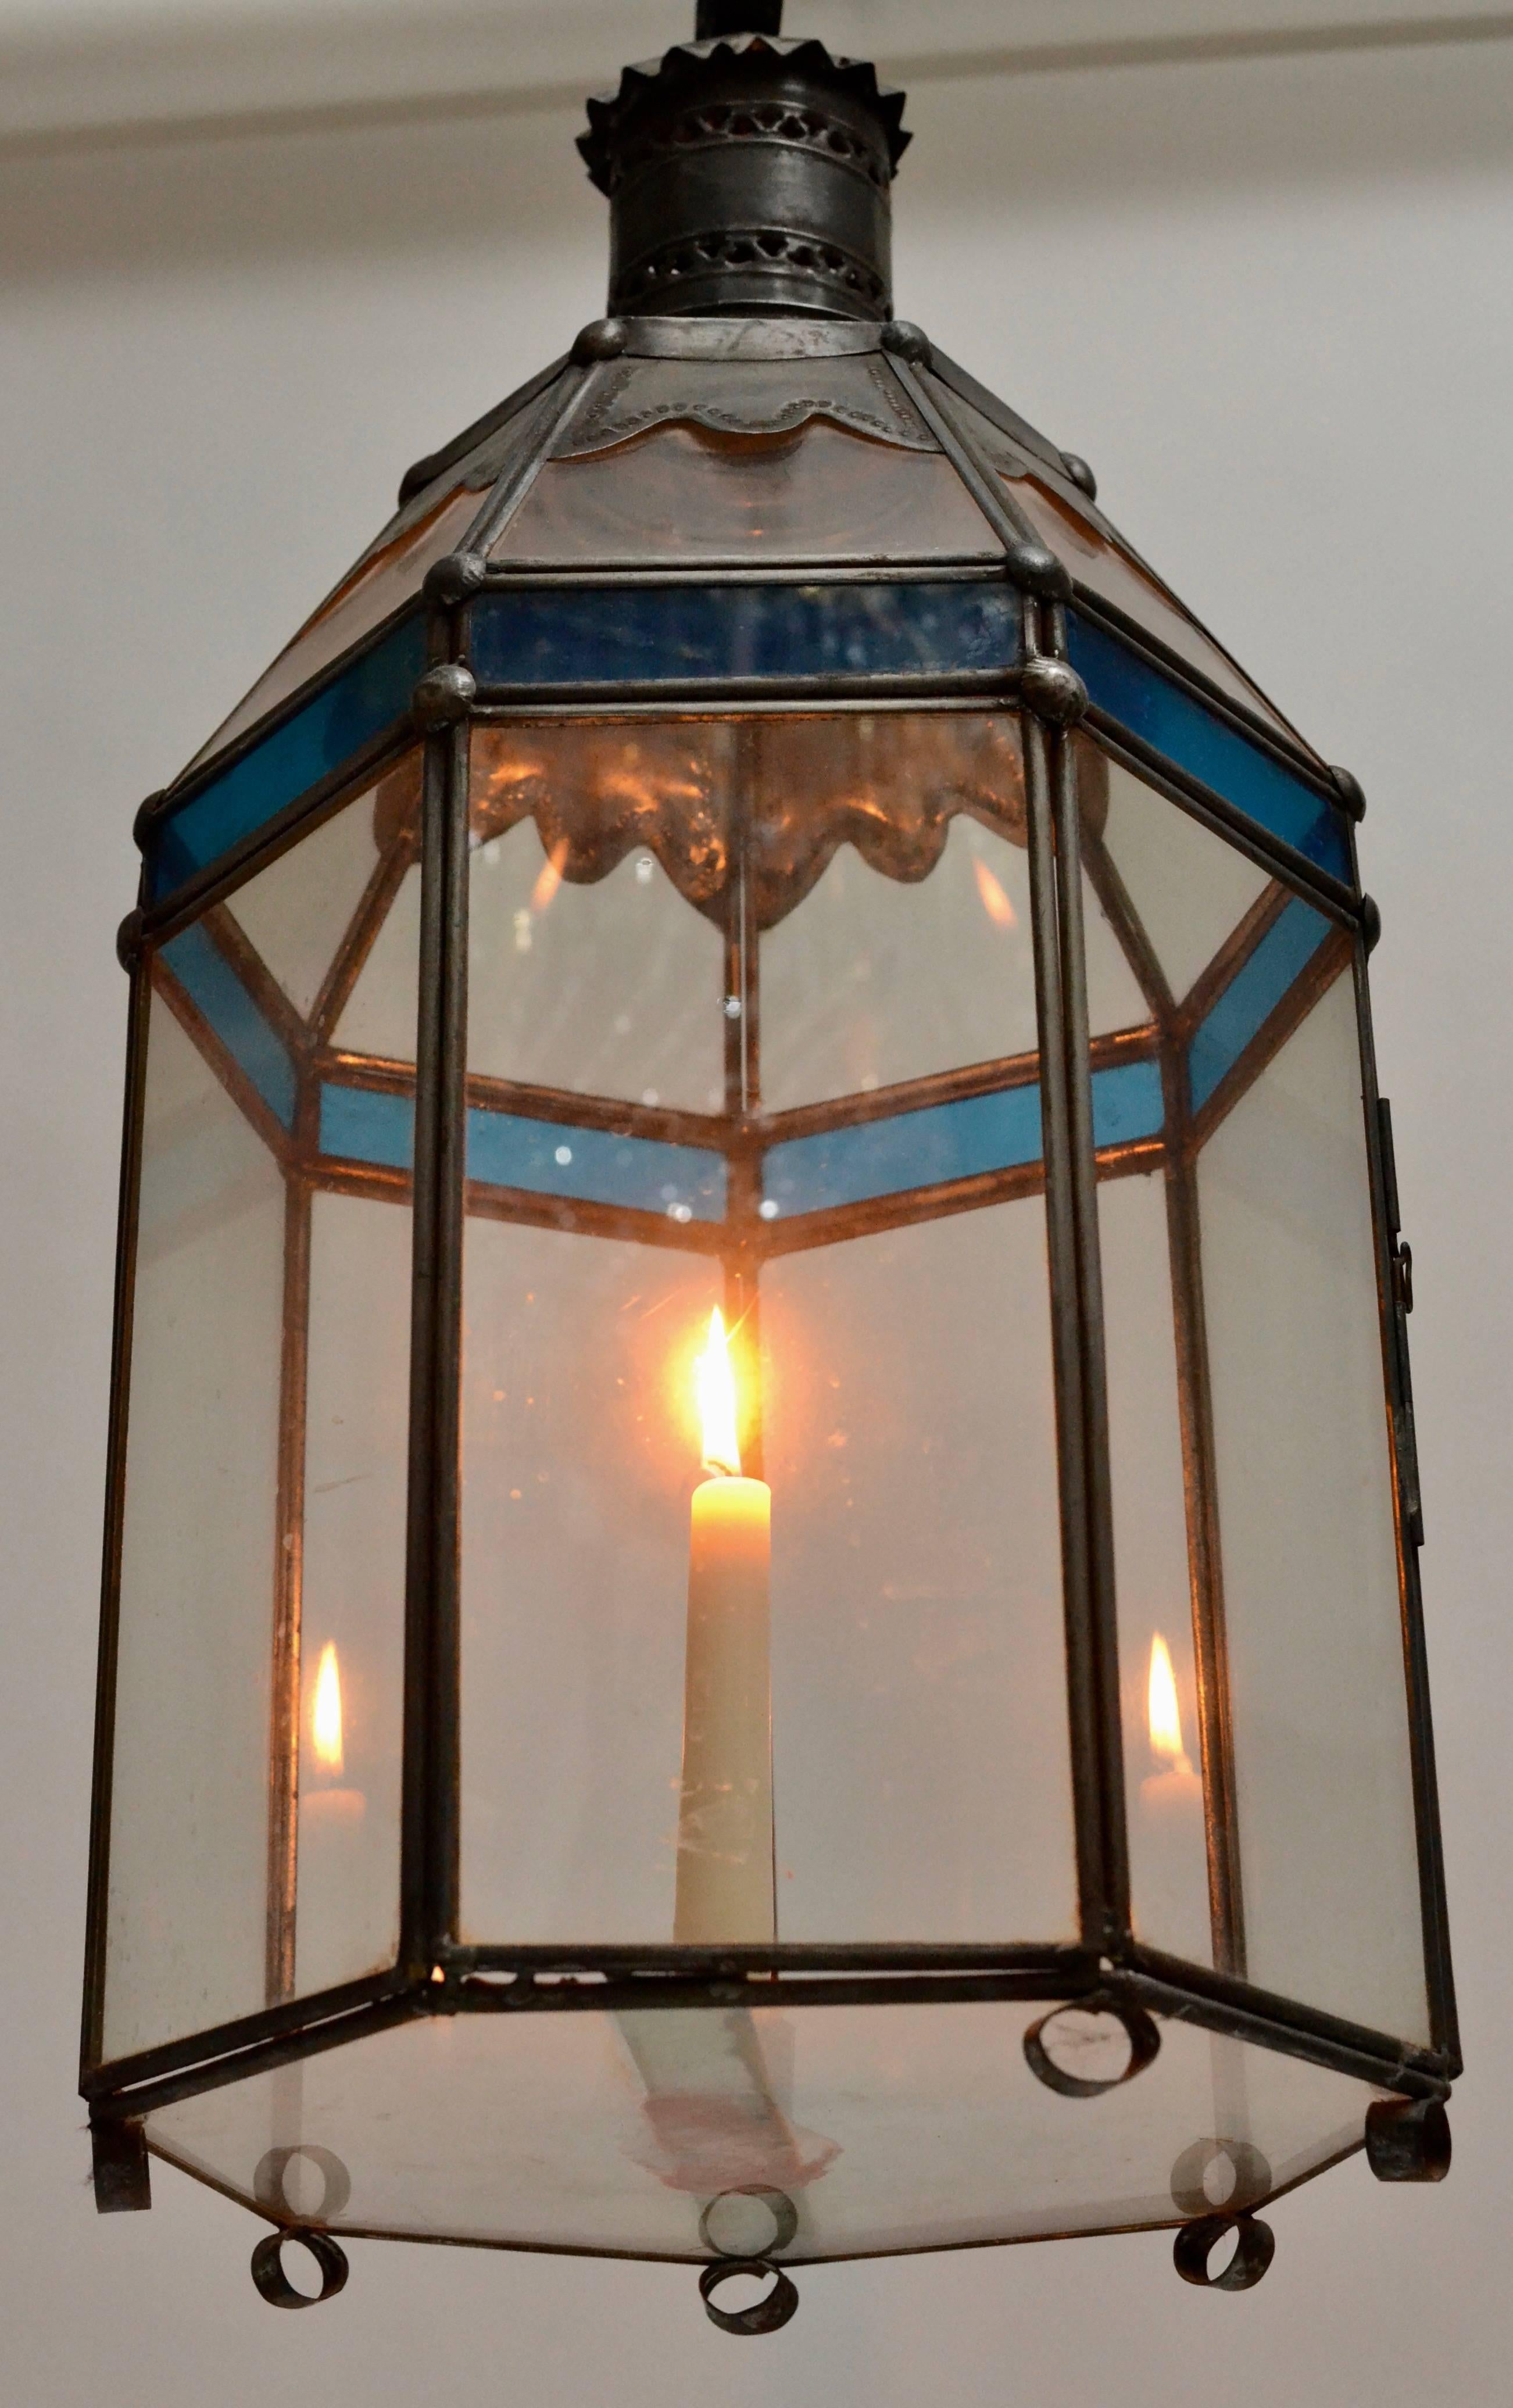 A Swedish tinplate lantern with blue and clear glass, 19th century.